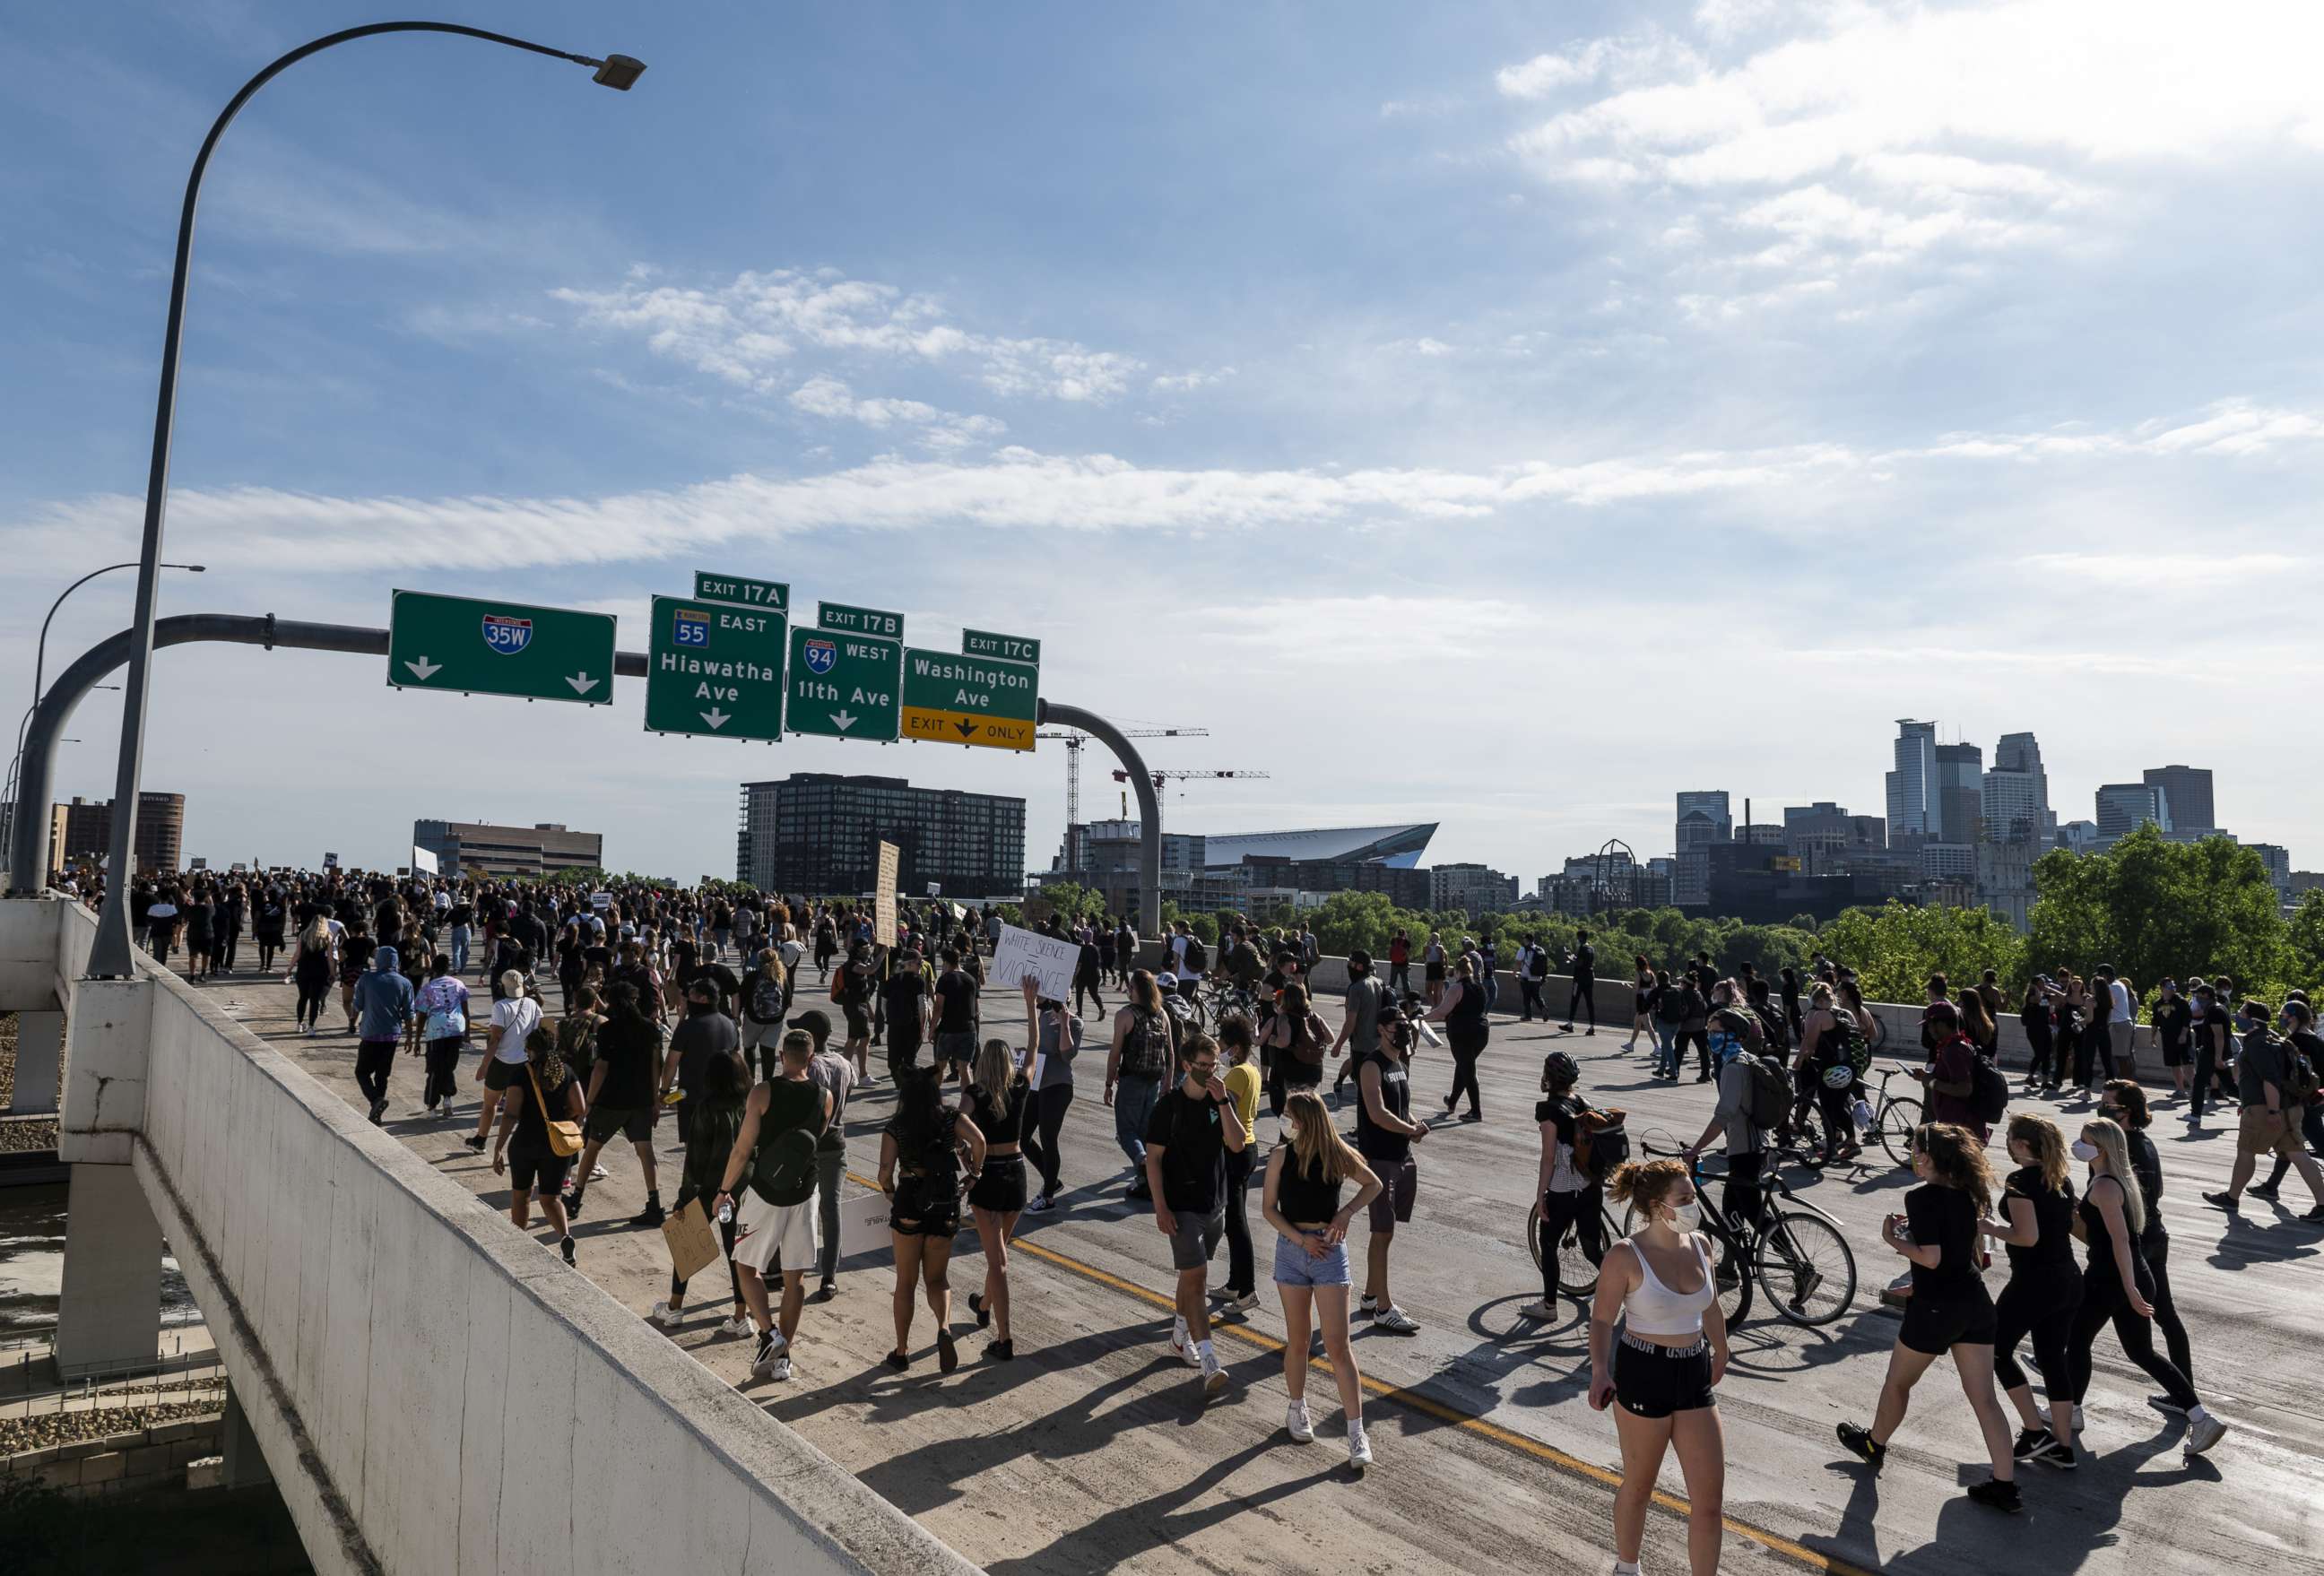 PHOTO: A crowd marches to protest the death of George Ford on the I-35W bridge over the Mississippi River, May 31, 2020 in Minneapolis, Minnesota.